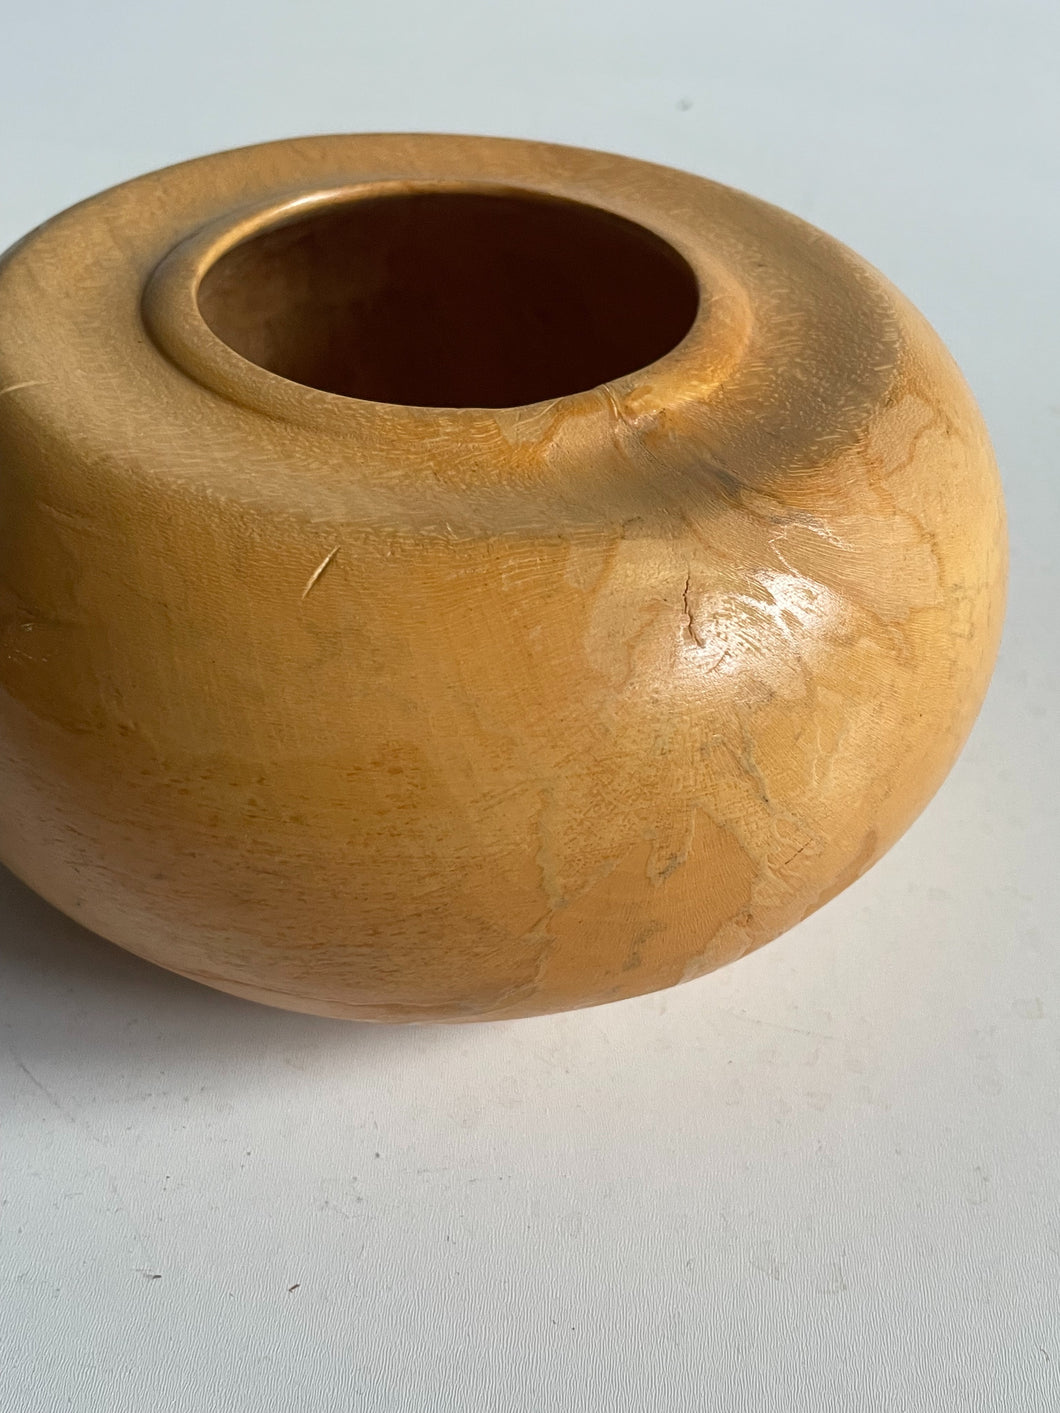 Hand Turned Wooden Bowl / Planter